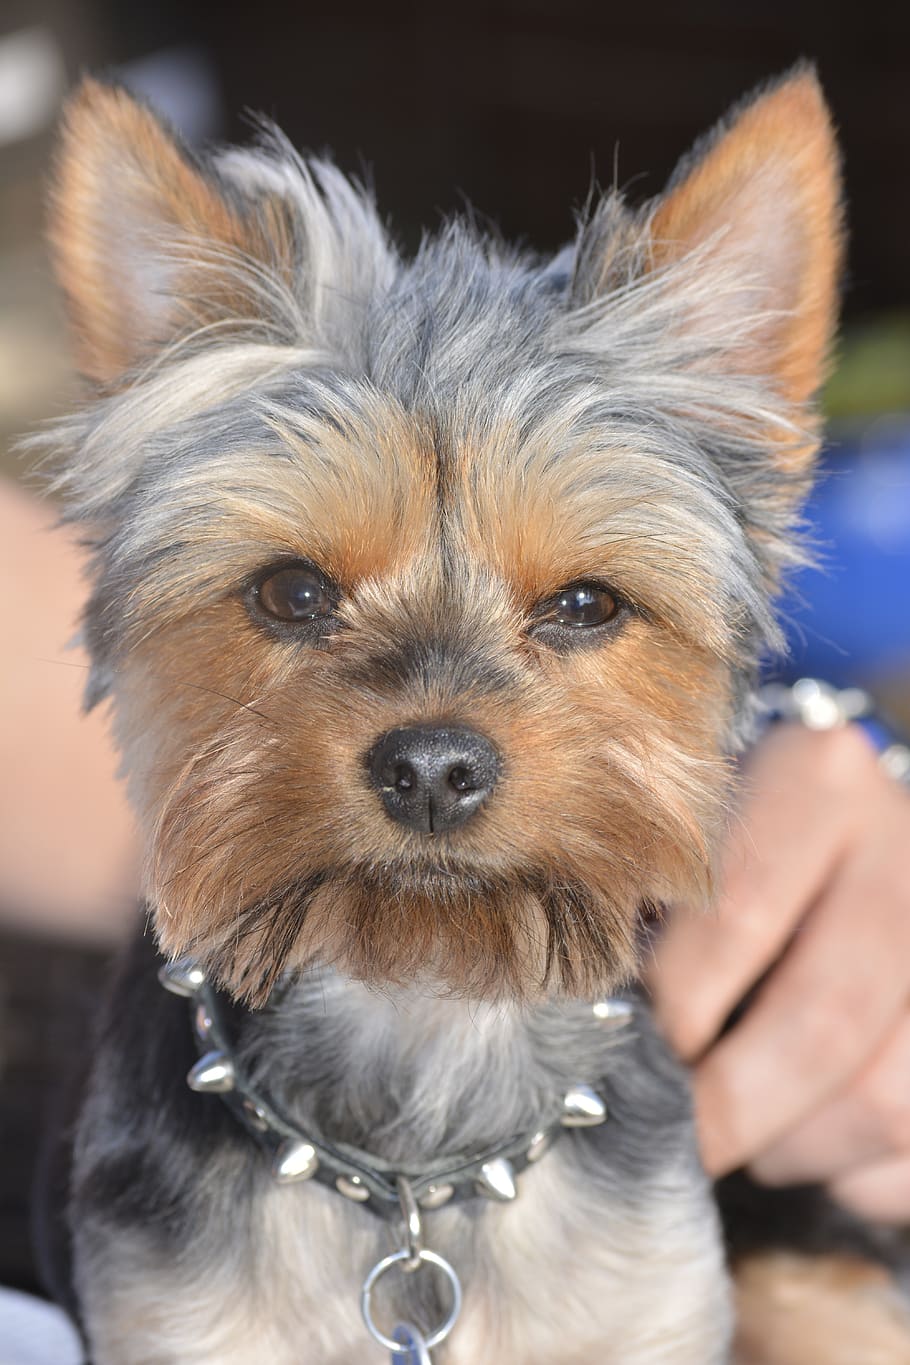 yorkie, dog, puppy, cute, adorable, yorkshire, grey, tanned, groomed, mammal